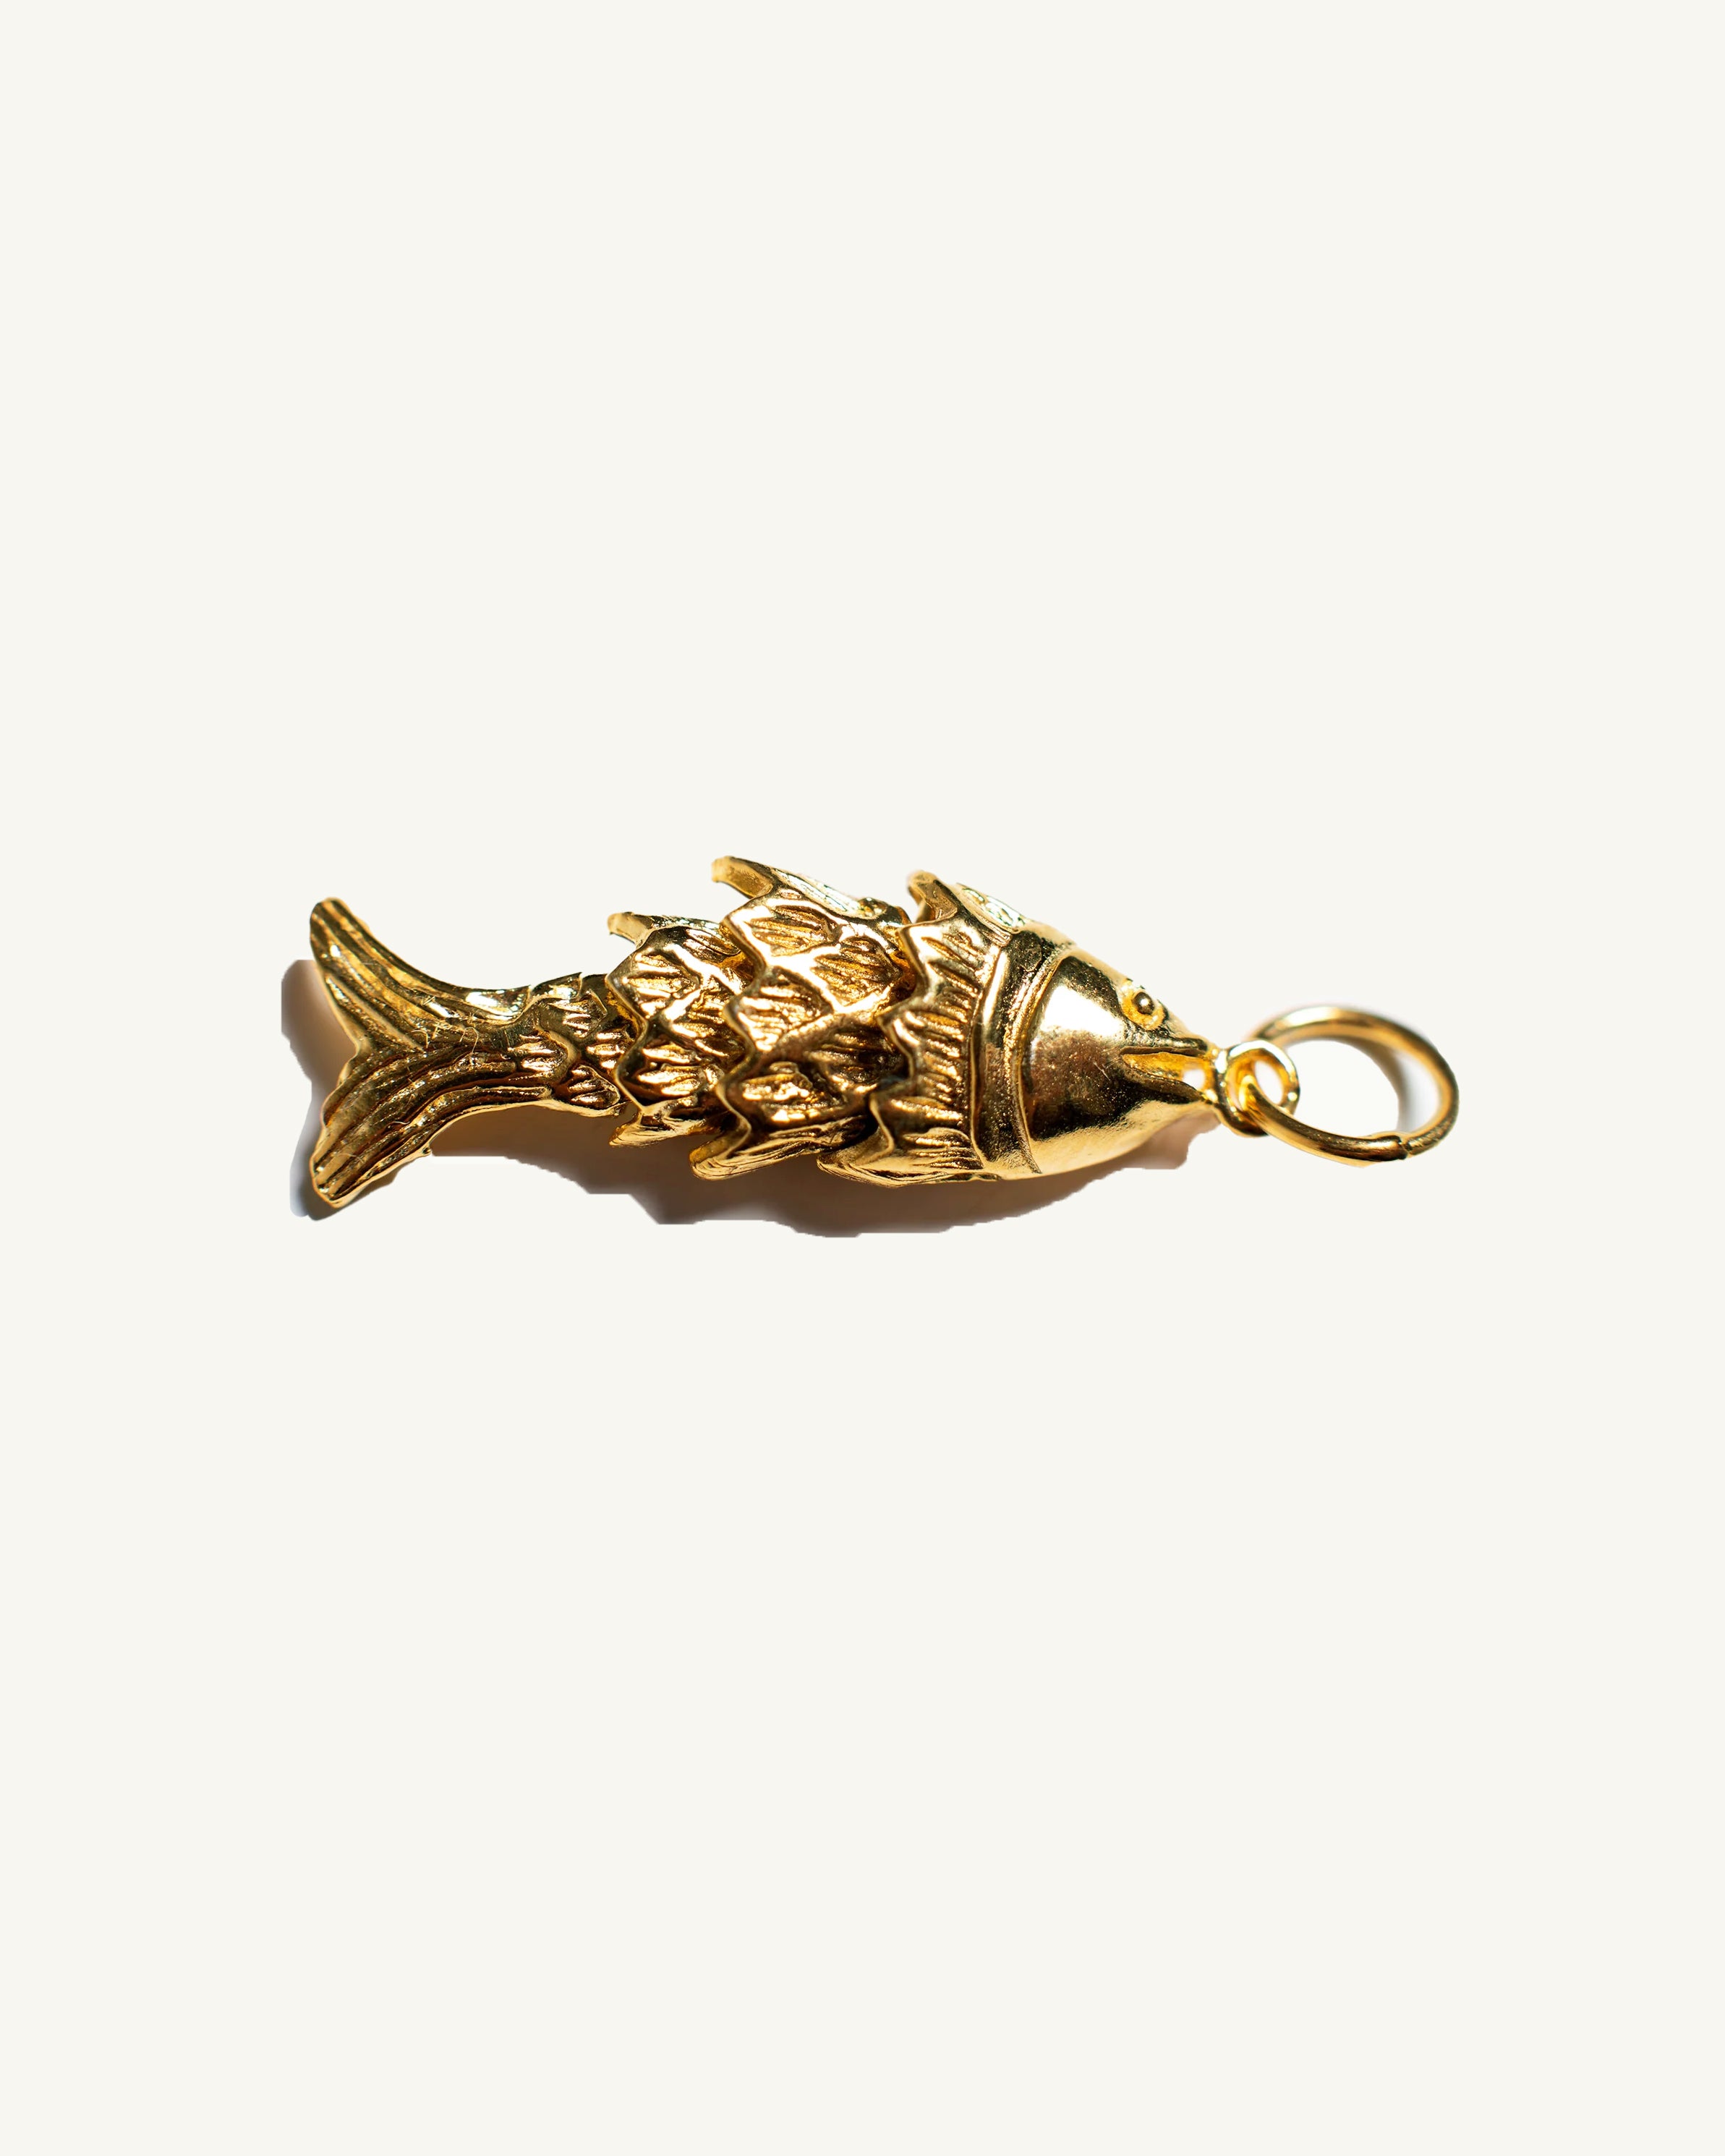 Buy Vintage D'orlan Articulated Fish Necklace Gold Toned Online in India -  Etsy